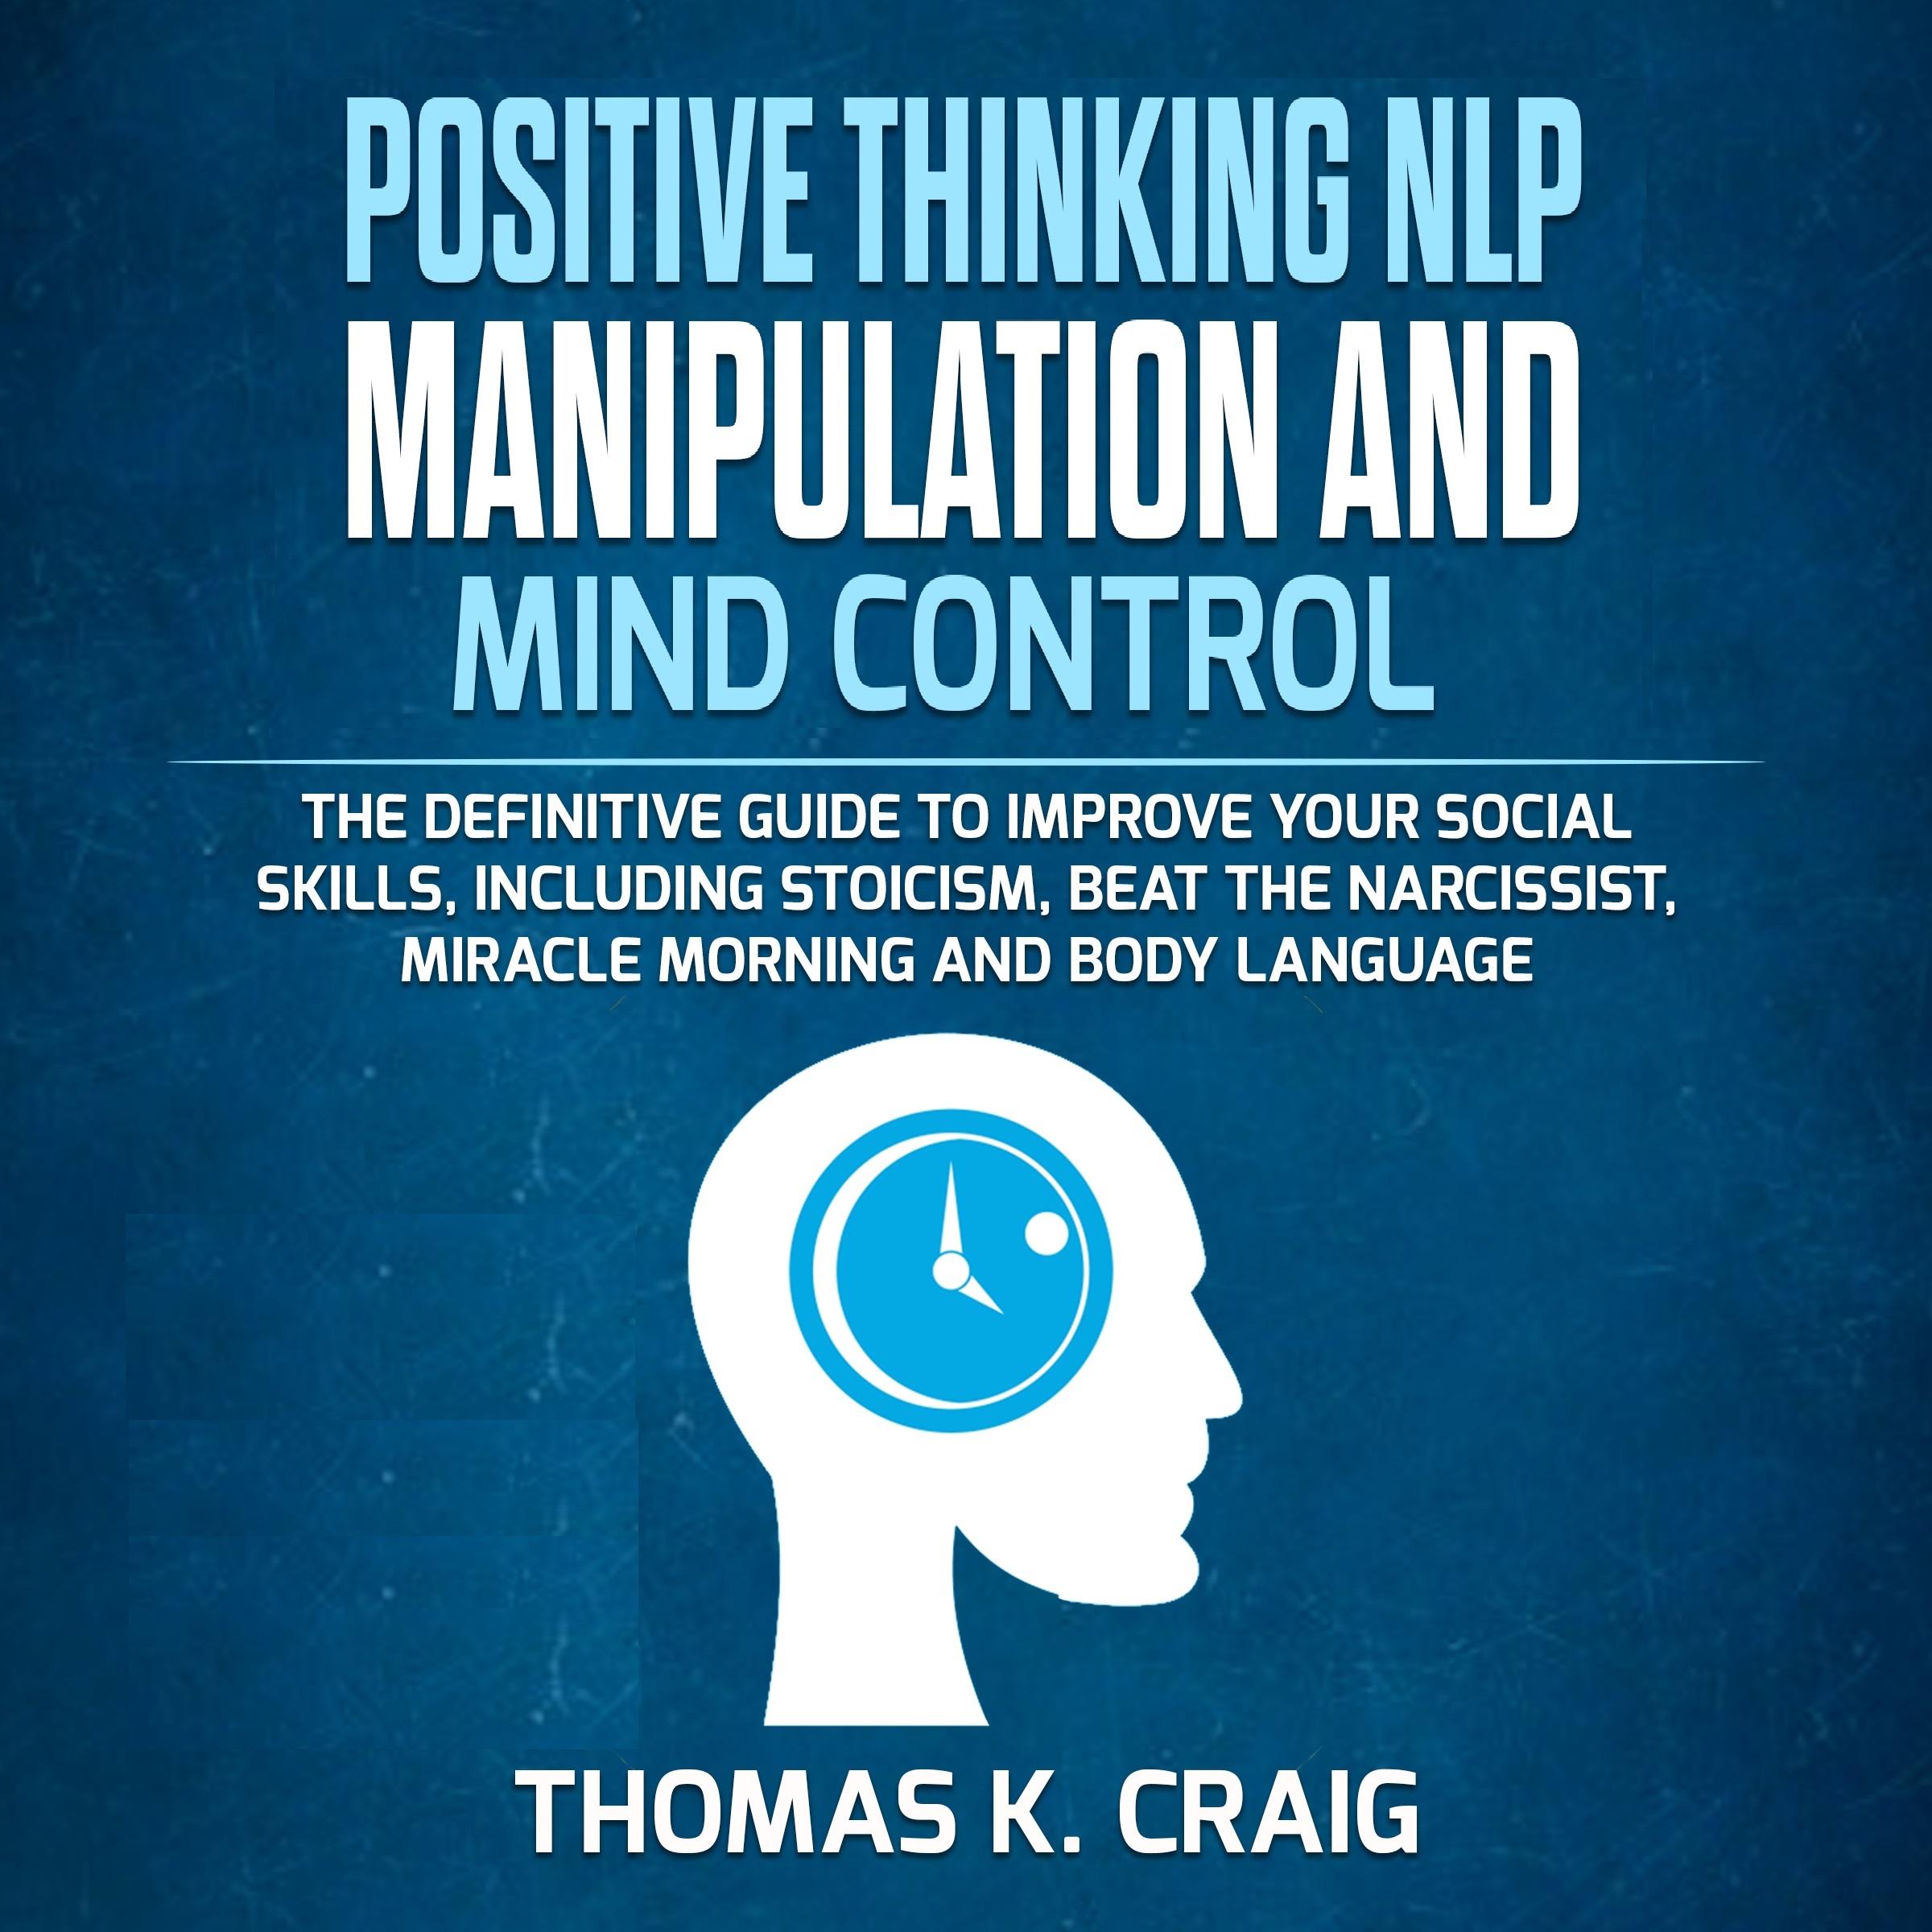 POSITIVE THINKING NLP MANIPULATION and MIND CONTROL: The definitive Guide to Improve your social skills, including Stoicism, Beat the Narcissist, Miracle morning and Body Language